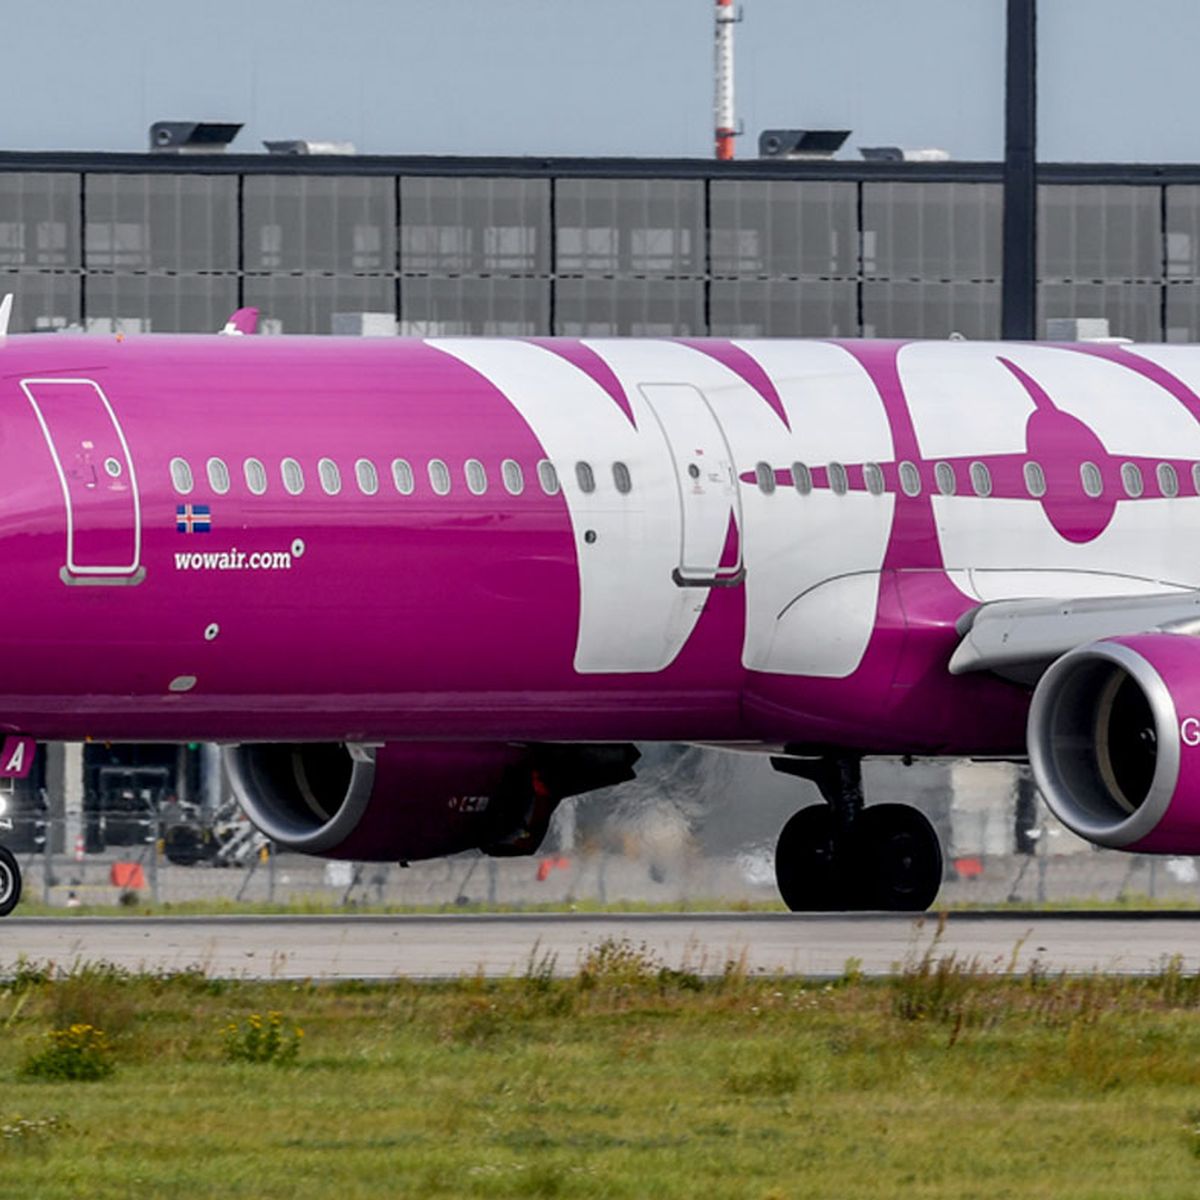 Wow Air ceases operations, leaving passengers stranded, Airline industry